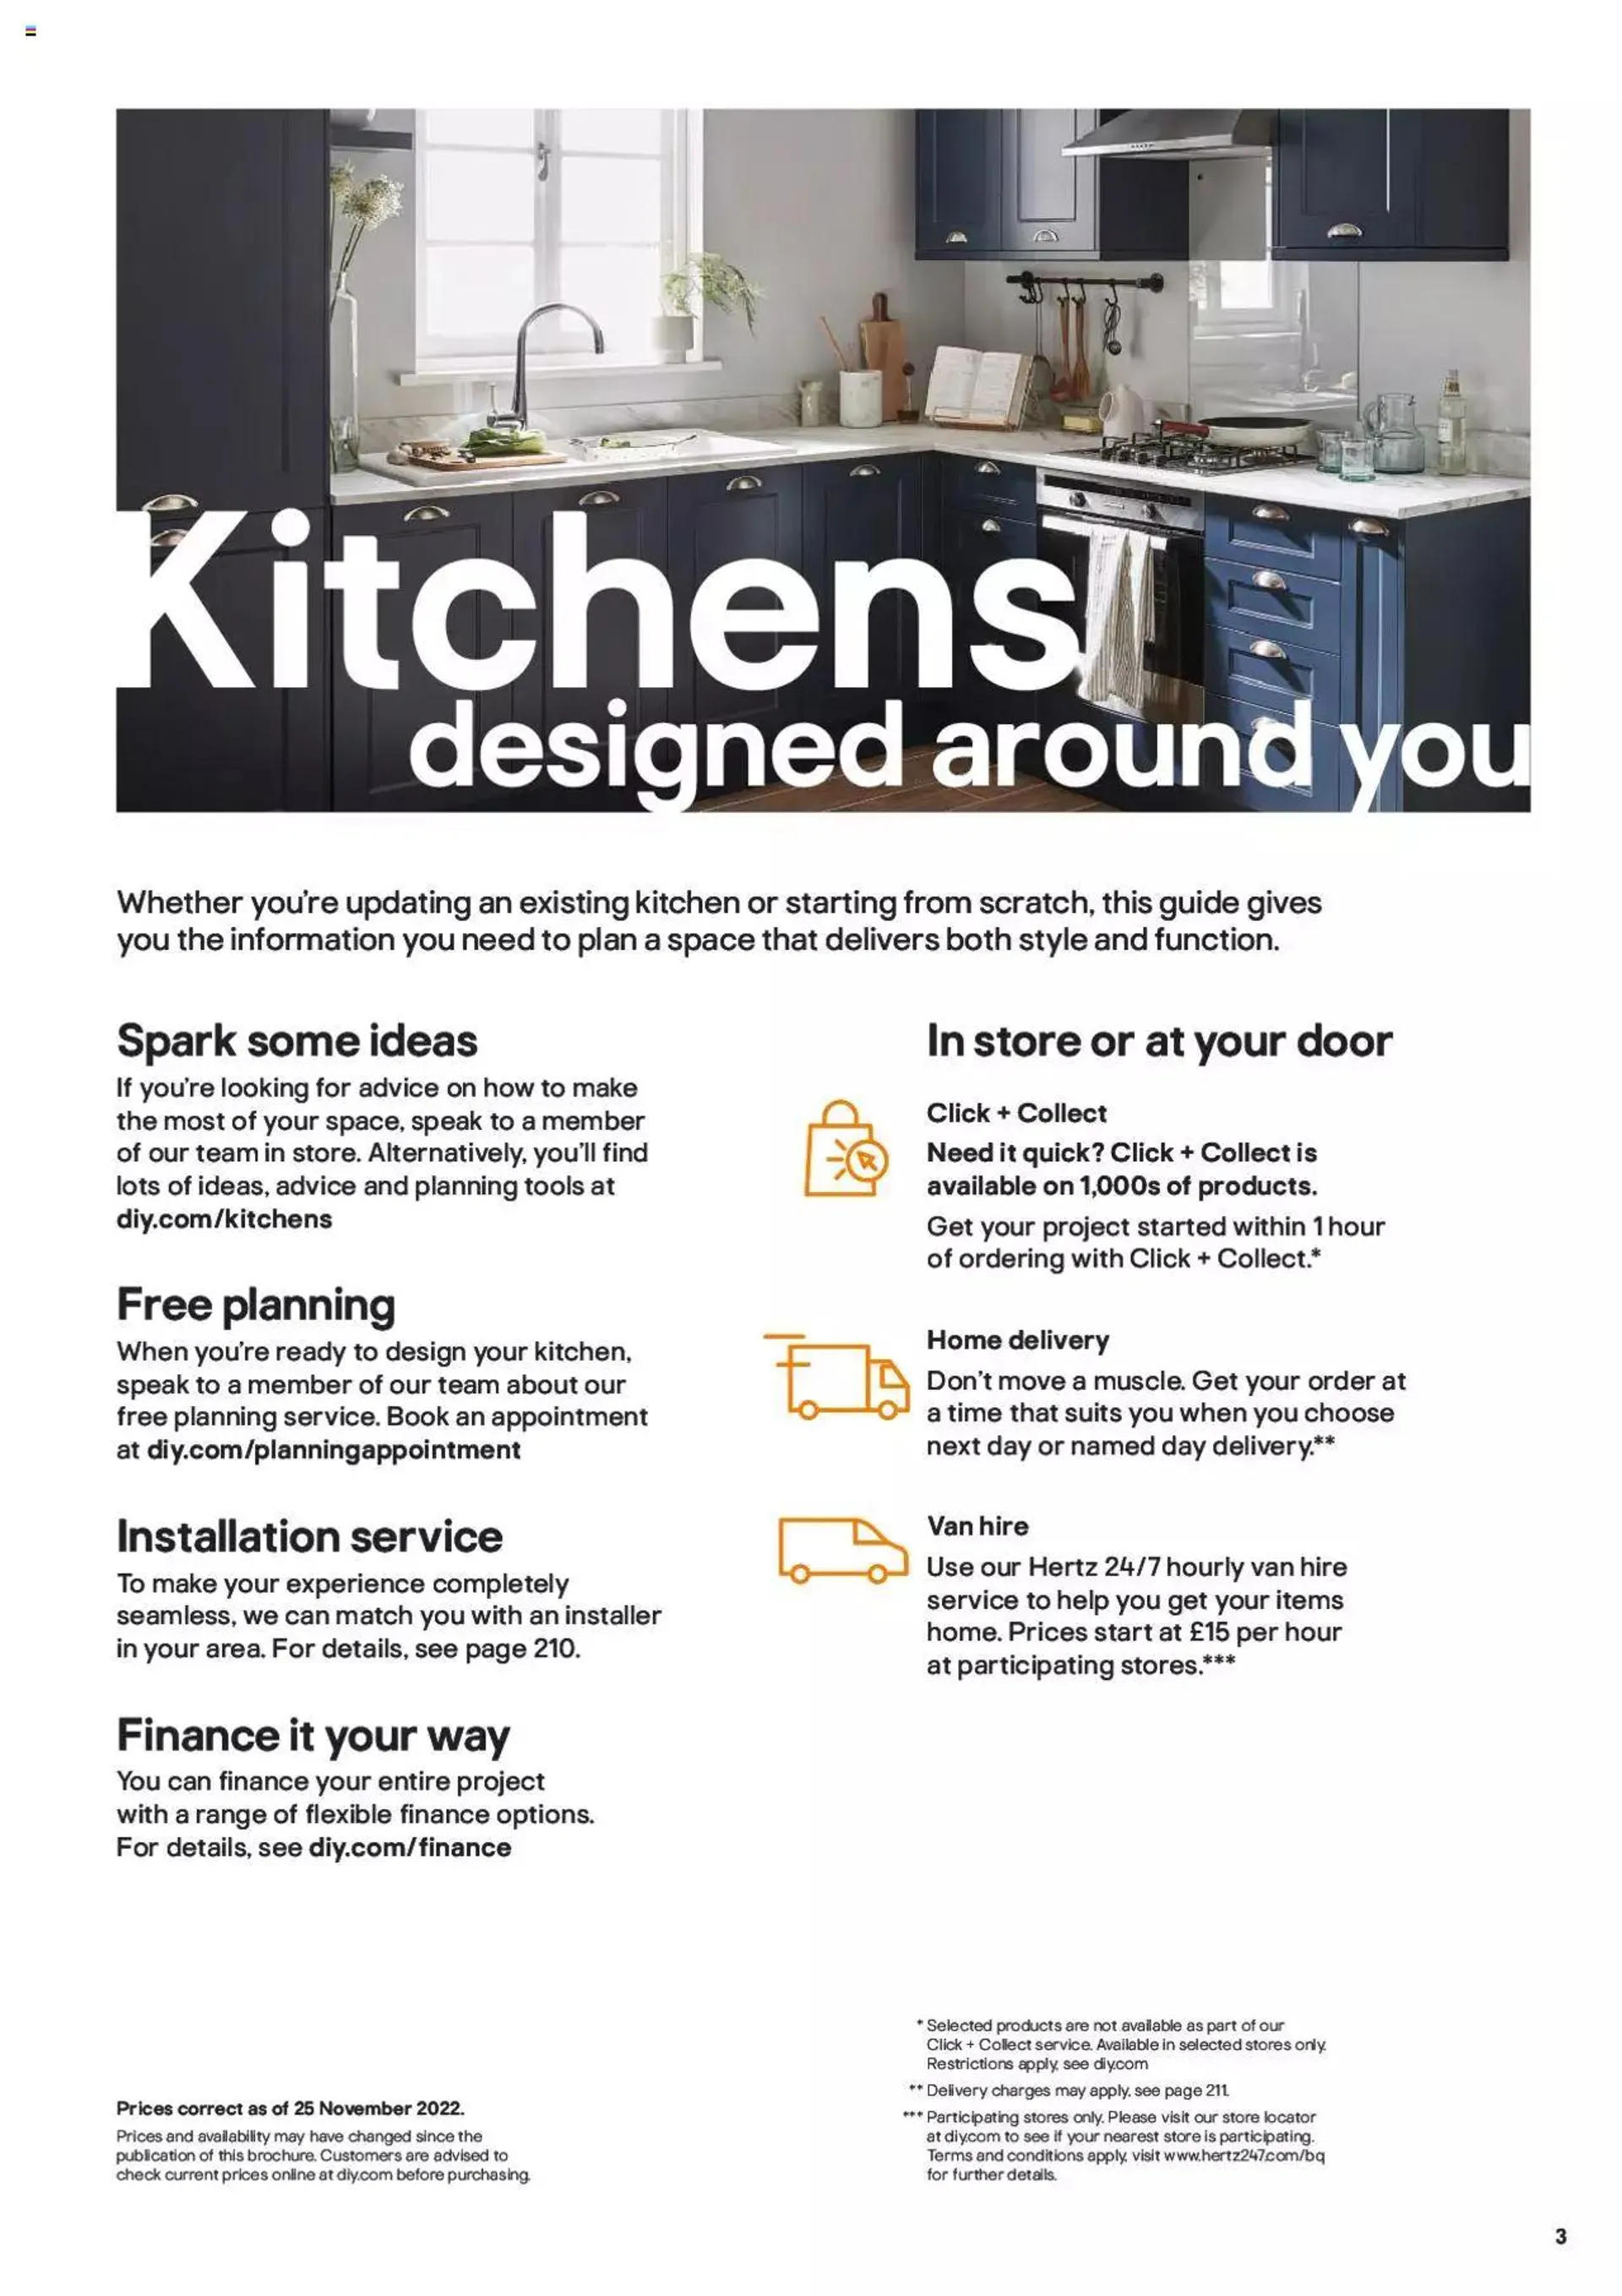 B&Q - Kitchens product & cabinetry guide - 2